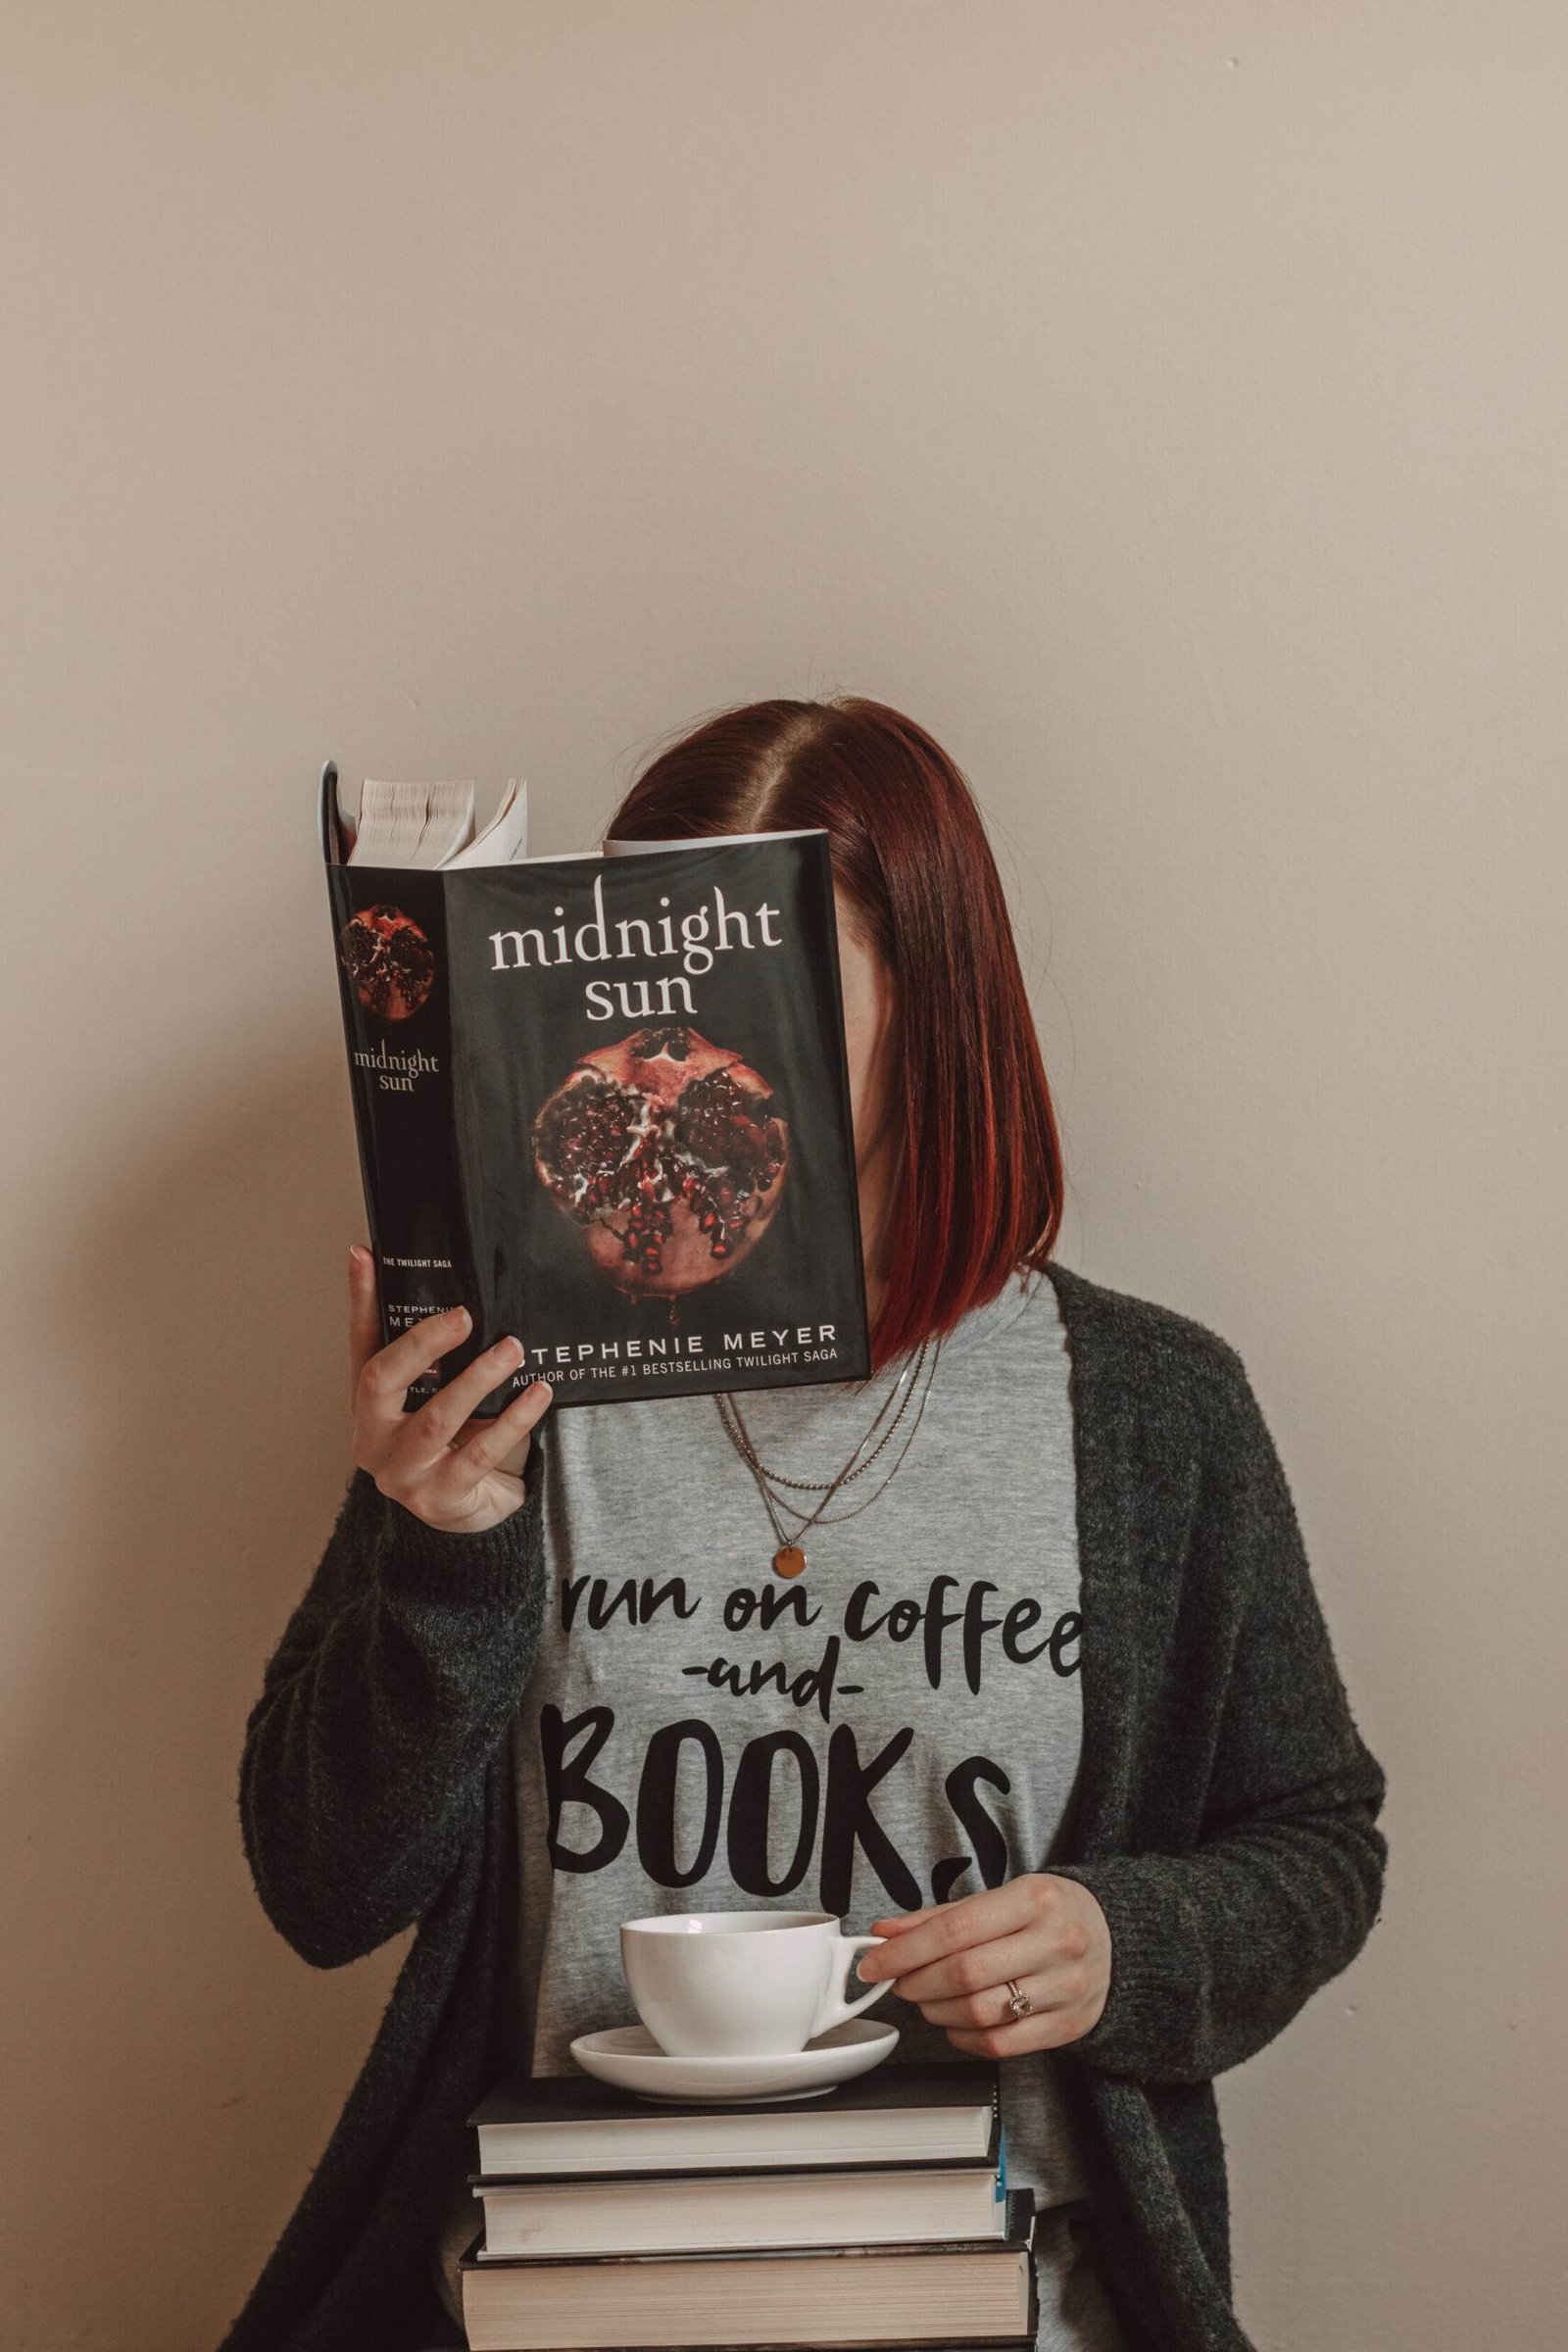 girl holding midnight sun book in front of her face while wearing a shirt that says "i run on coffee and books"